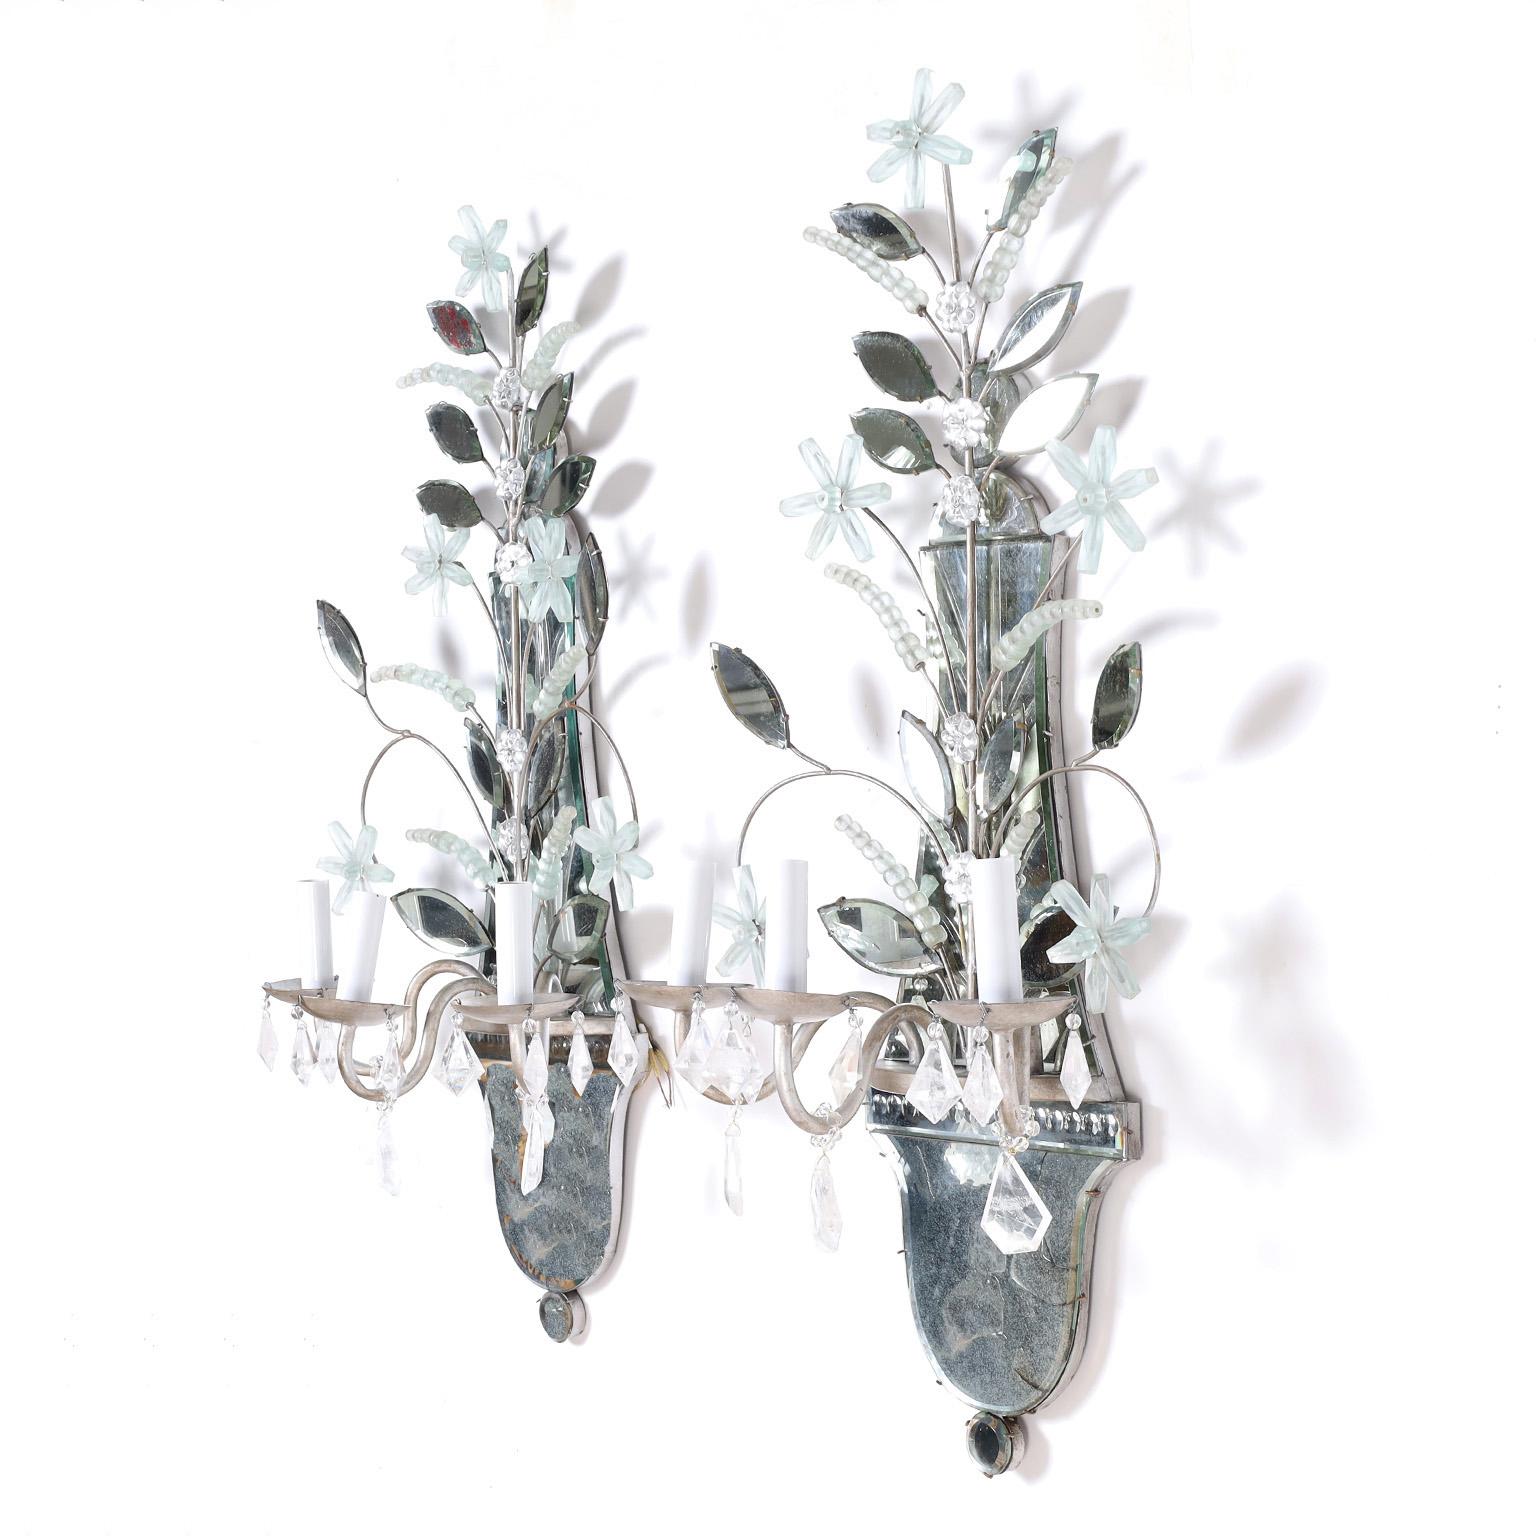 Regency Pair of Mid-Century Italian Mirrored Wall Sconces with Rock Crystals For Sale